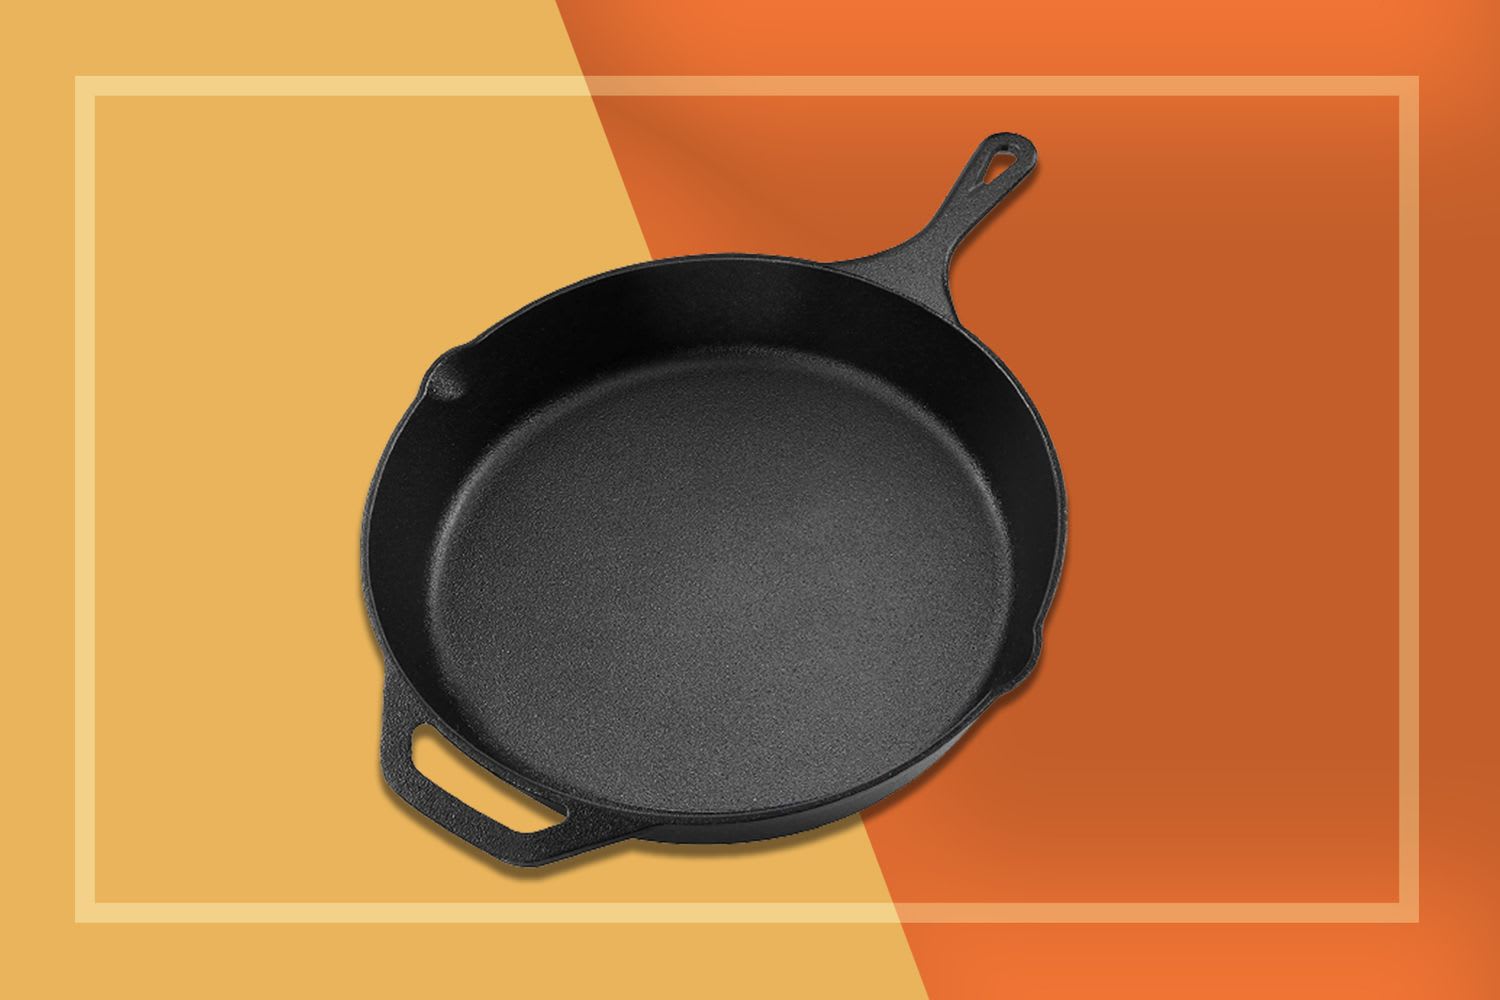 The Cast Iron Skillet That Can Cook 'Restaurant-Quality' Food at Home Is on Sale for $25